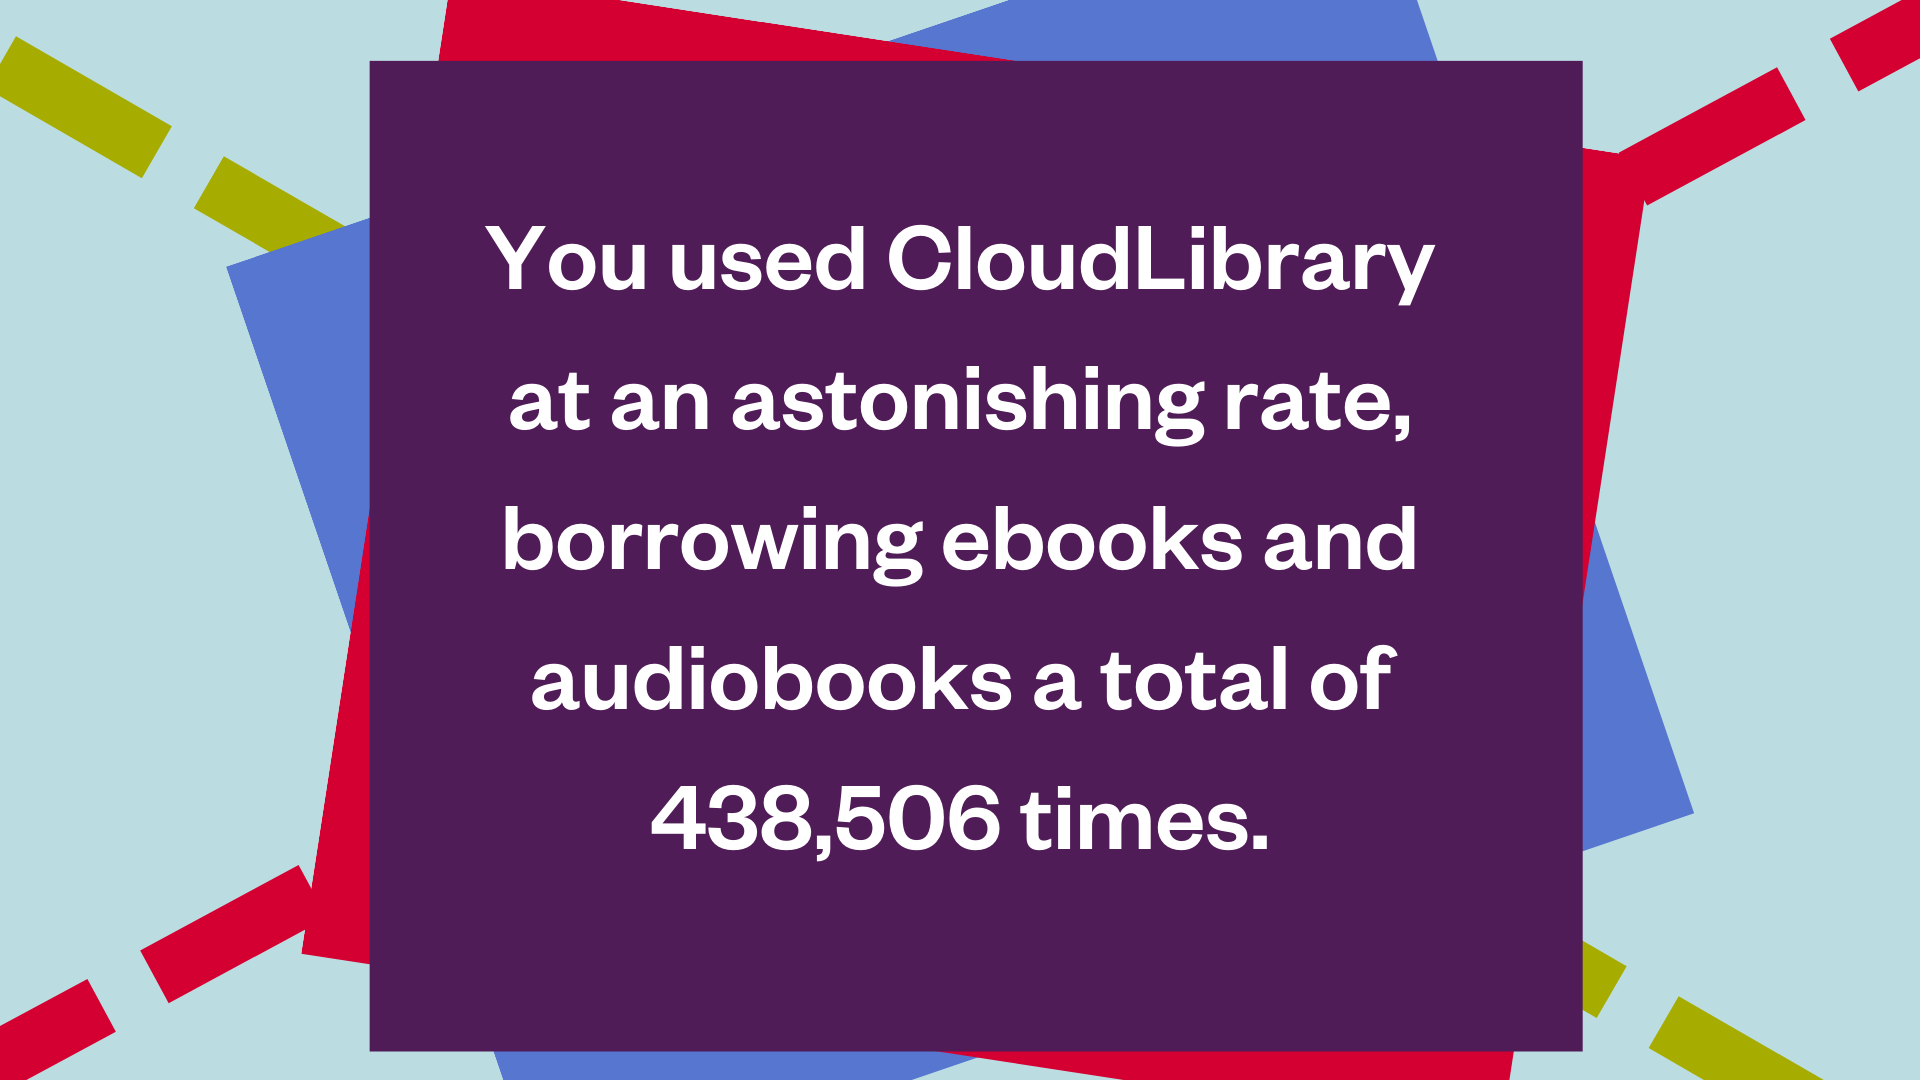 You used CloudLibrary at an astonishing rate, borrowing ebooks and audiobooks a total of 438,506 times. 